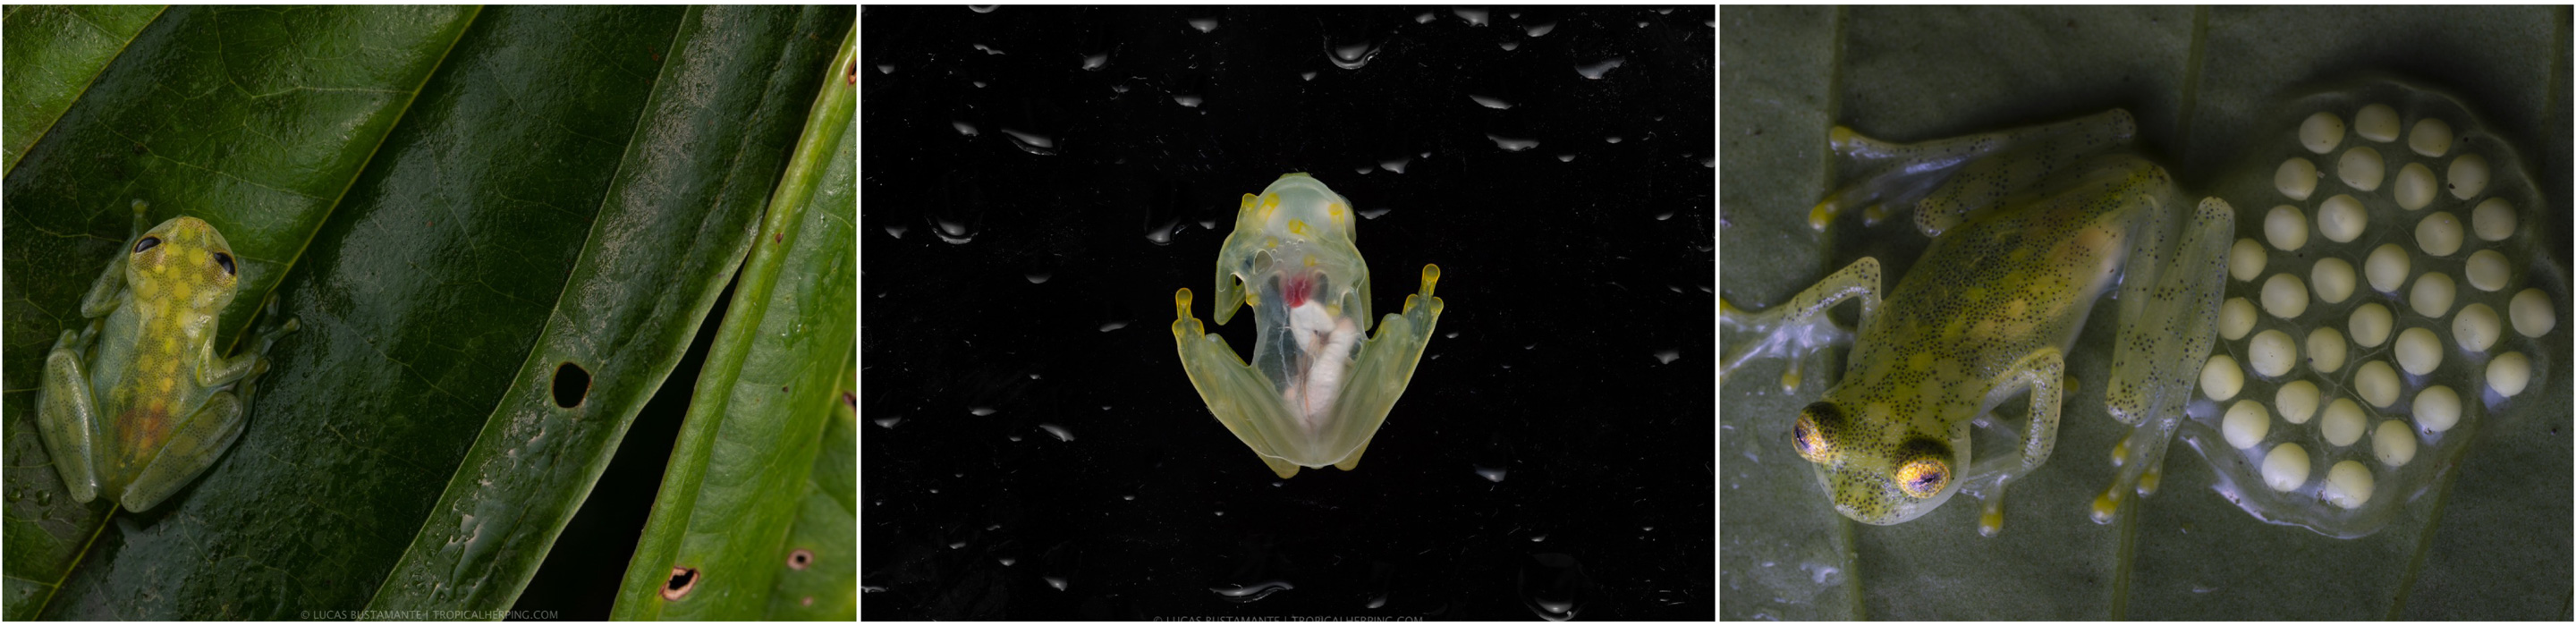  A Mashpi glass frog (Hyalinobatrachium mashpi) observed on a leaf in the Andes region of Ecuador. H. mashpi have similar color patterns (left), transparent abdomens (center), On the right, a male Mashpi glass frog protects its eggs until they hatch